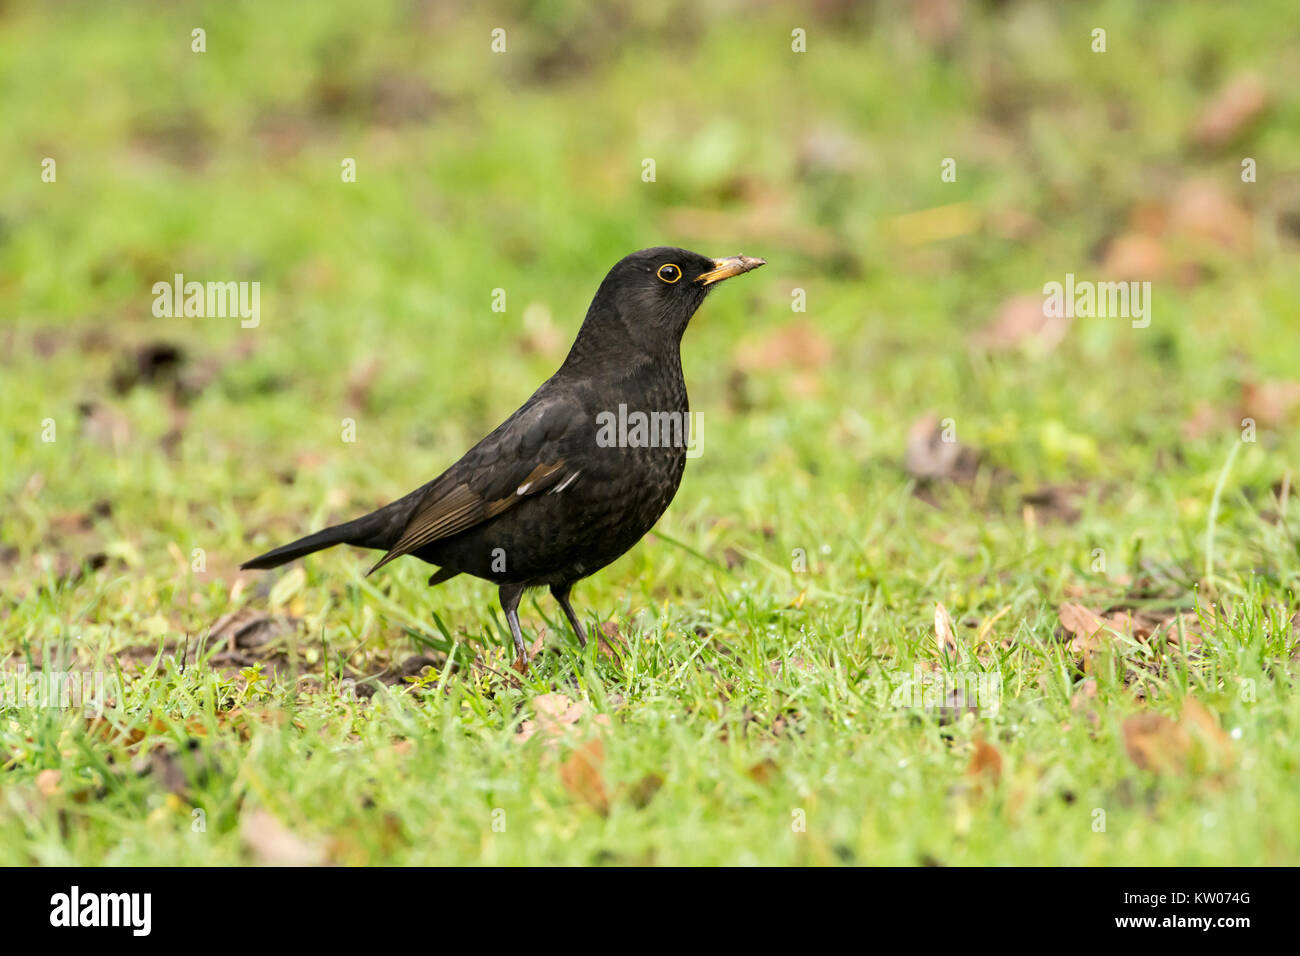 Male blackbird (Tursus merula) foraging in a field. This is a young bird, note the brown plumage remaining in the wings. Stock Photo